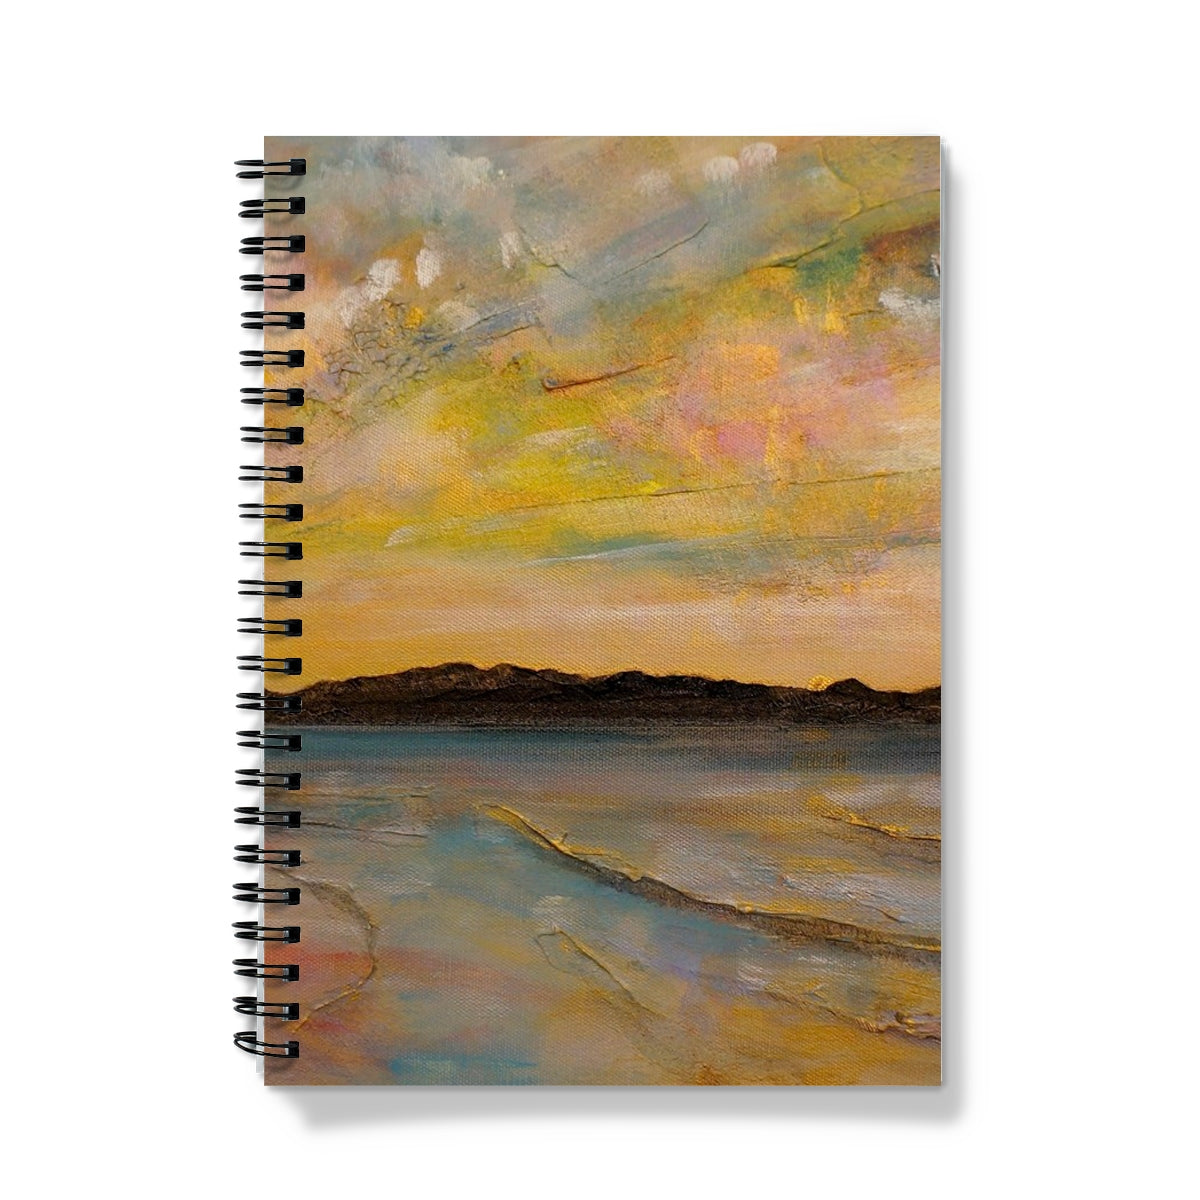 Vallay Island North Uist Art Gifts Notebook-Journals & Notebooks-Hebridean Islands Art Gallery-A5-Lined-Paintings, Prints, Homeware, Art Gifts From Scotland By Scottish Artist Kevin Hunter